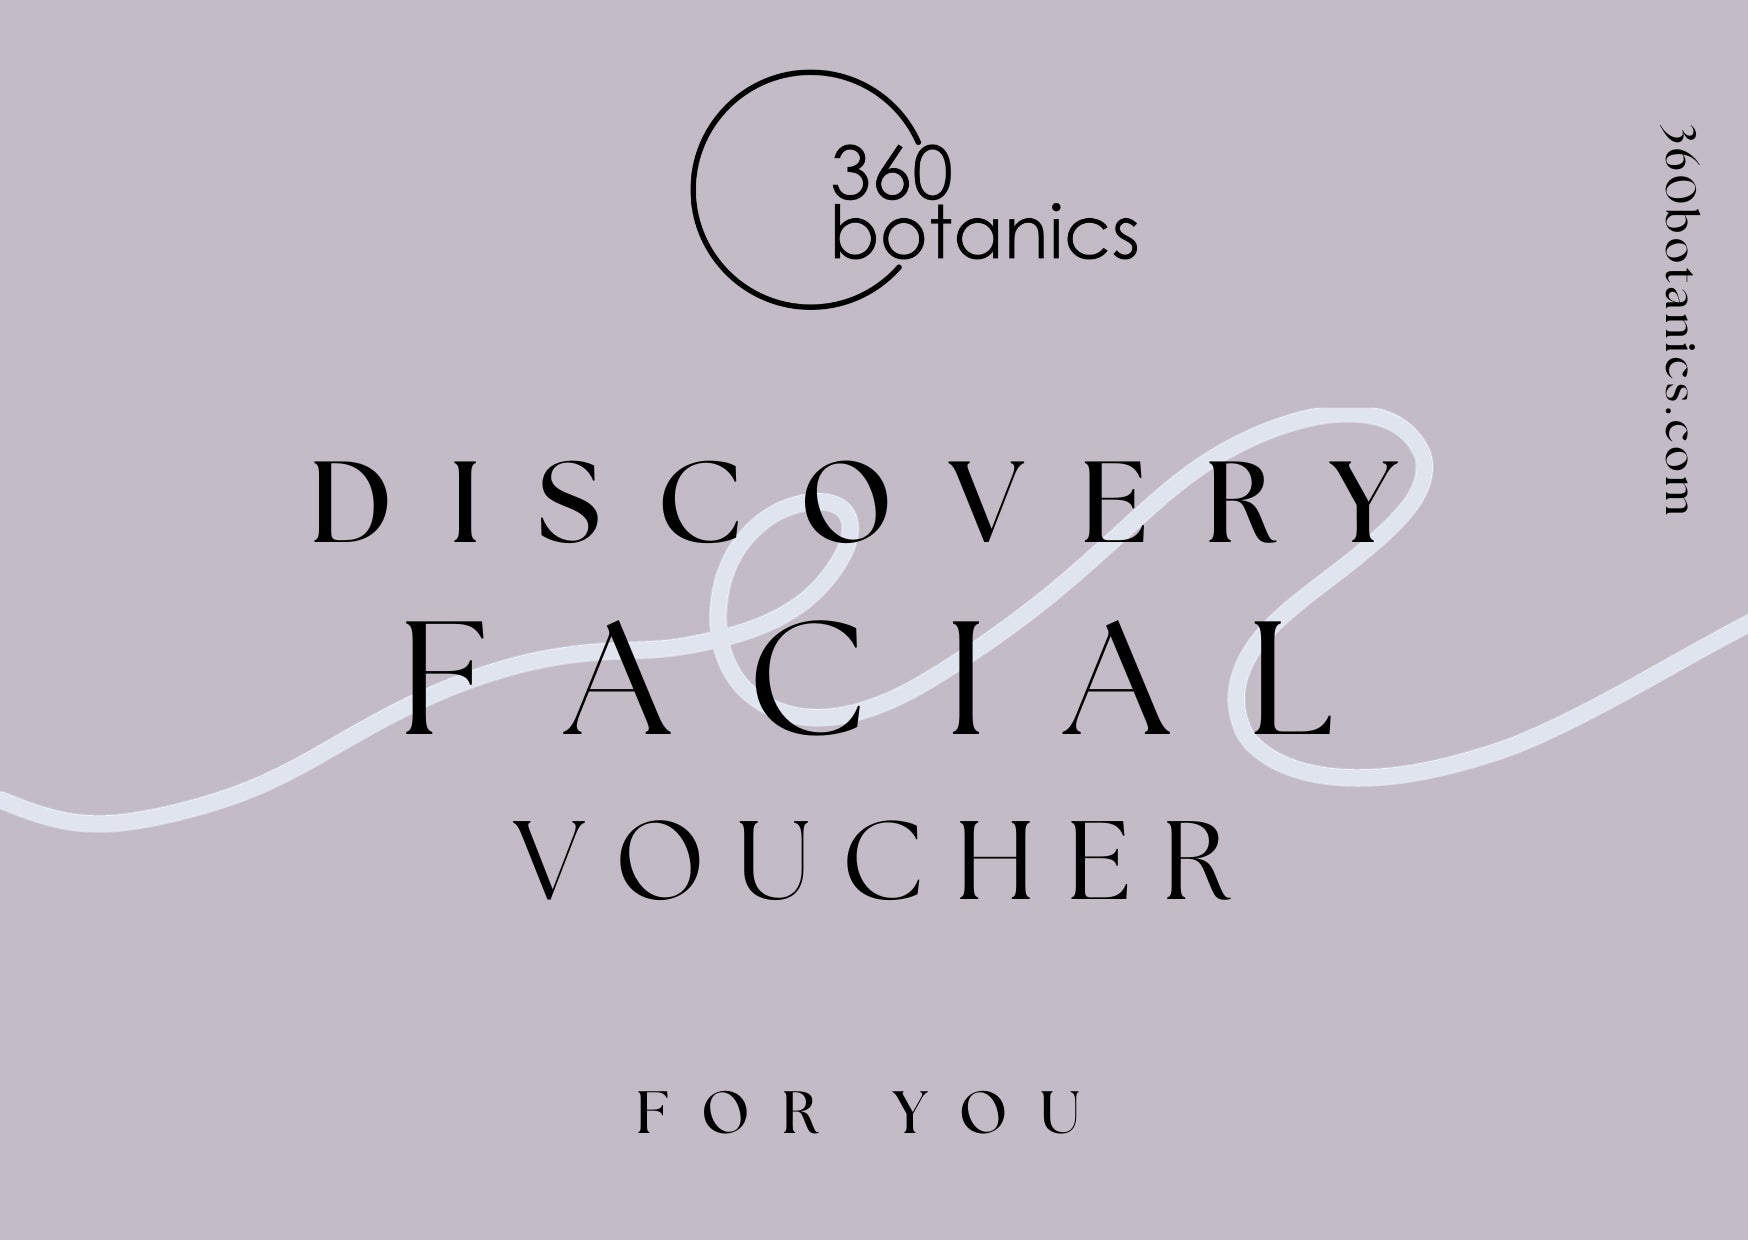 Gift voucher from 360 Botanics for a Discovery Facial, with a sleek and minimalistic design featuring a light purple background and elegant white and dark grey text, accompanied by a swirling white line, and the website address '360botanics.com